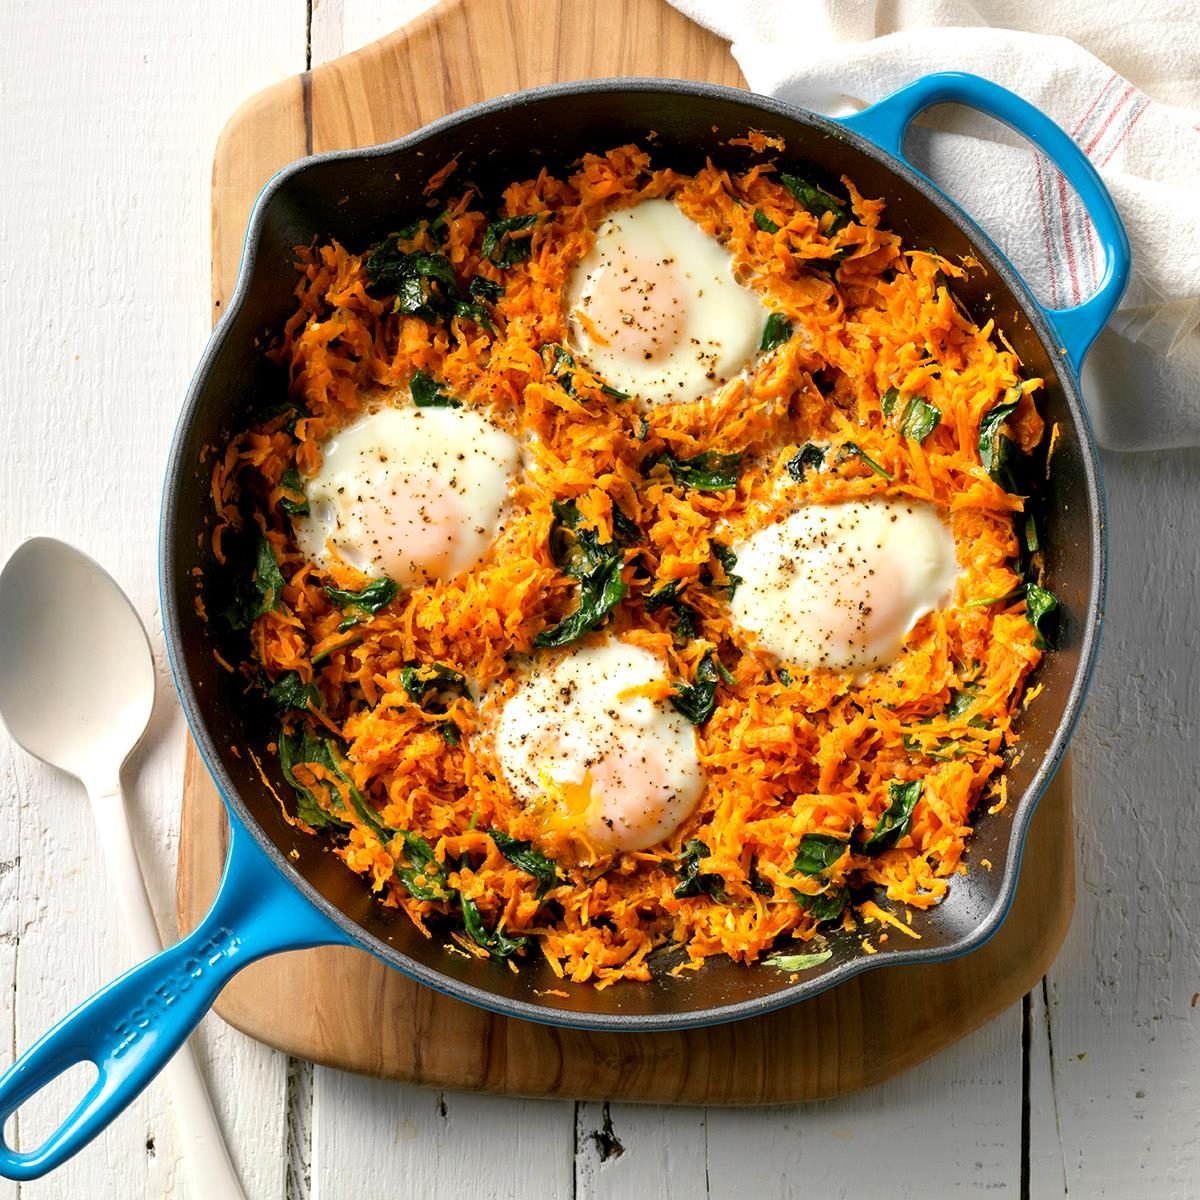 Sweet Potato and Egg Skillet Recipe: How to Make It